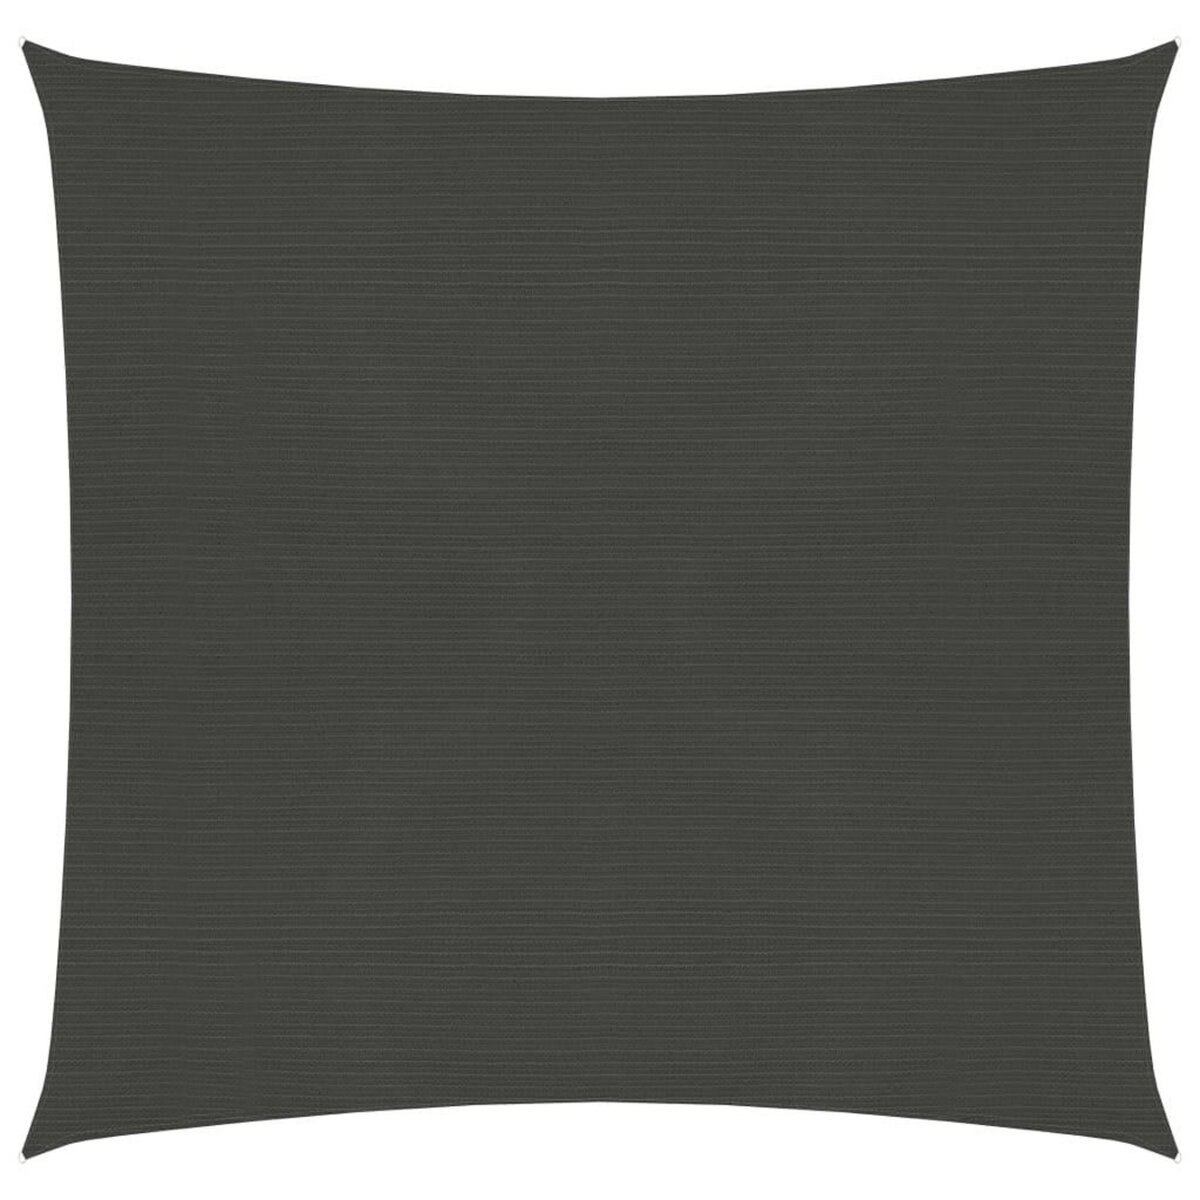 VIDAXL Voile d'ombrage 160 g/m^2 Anthracite 3x3 m PEHD